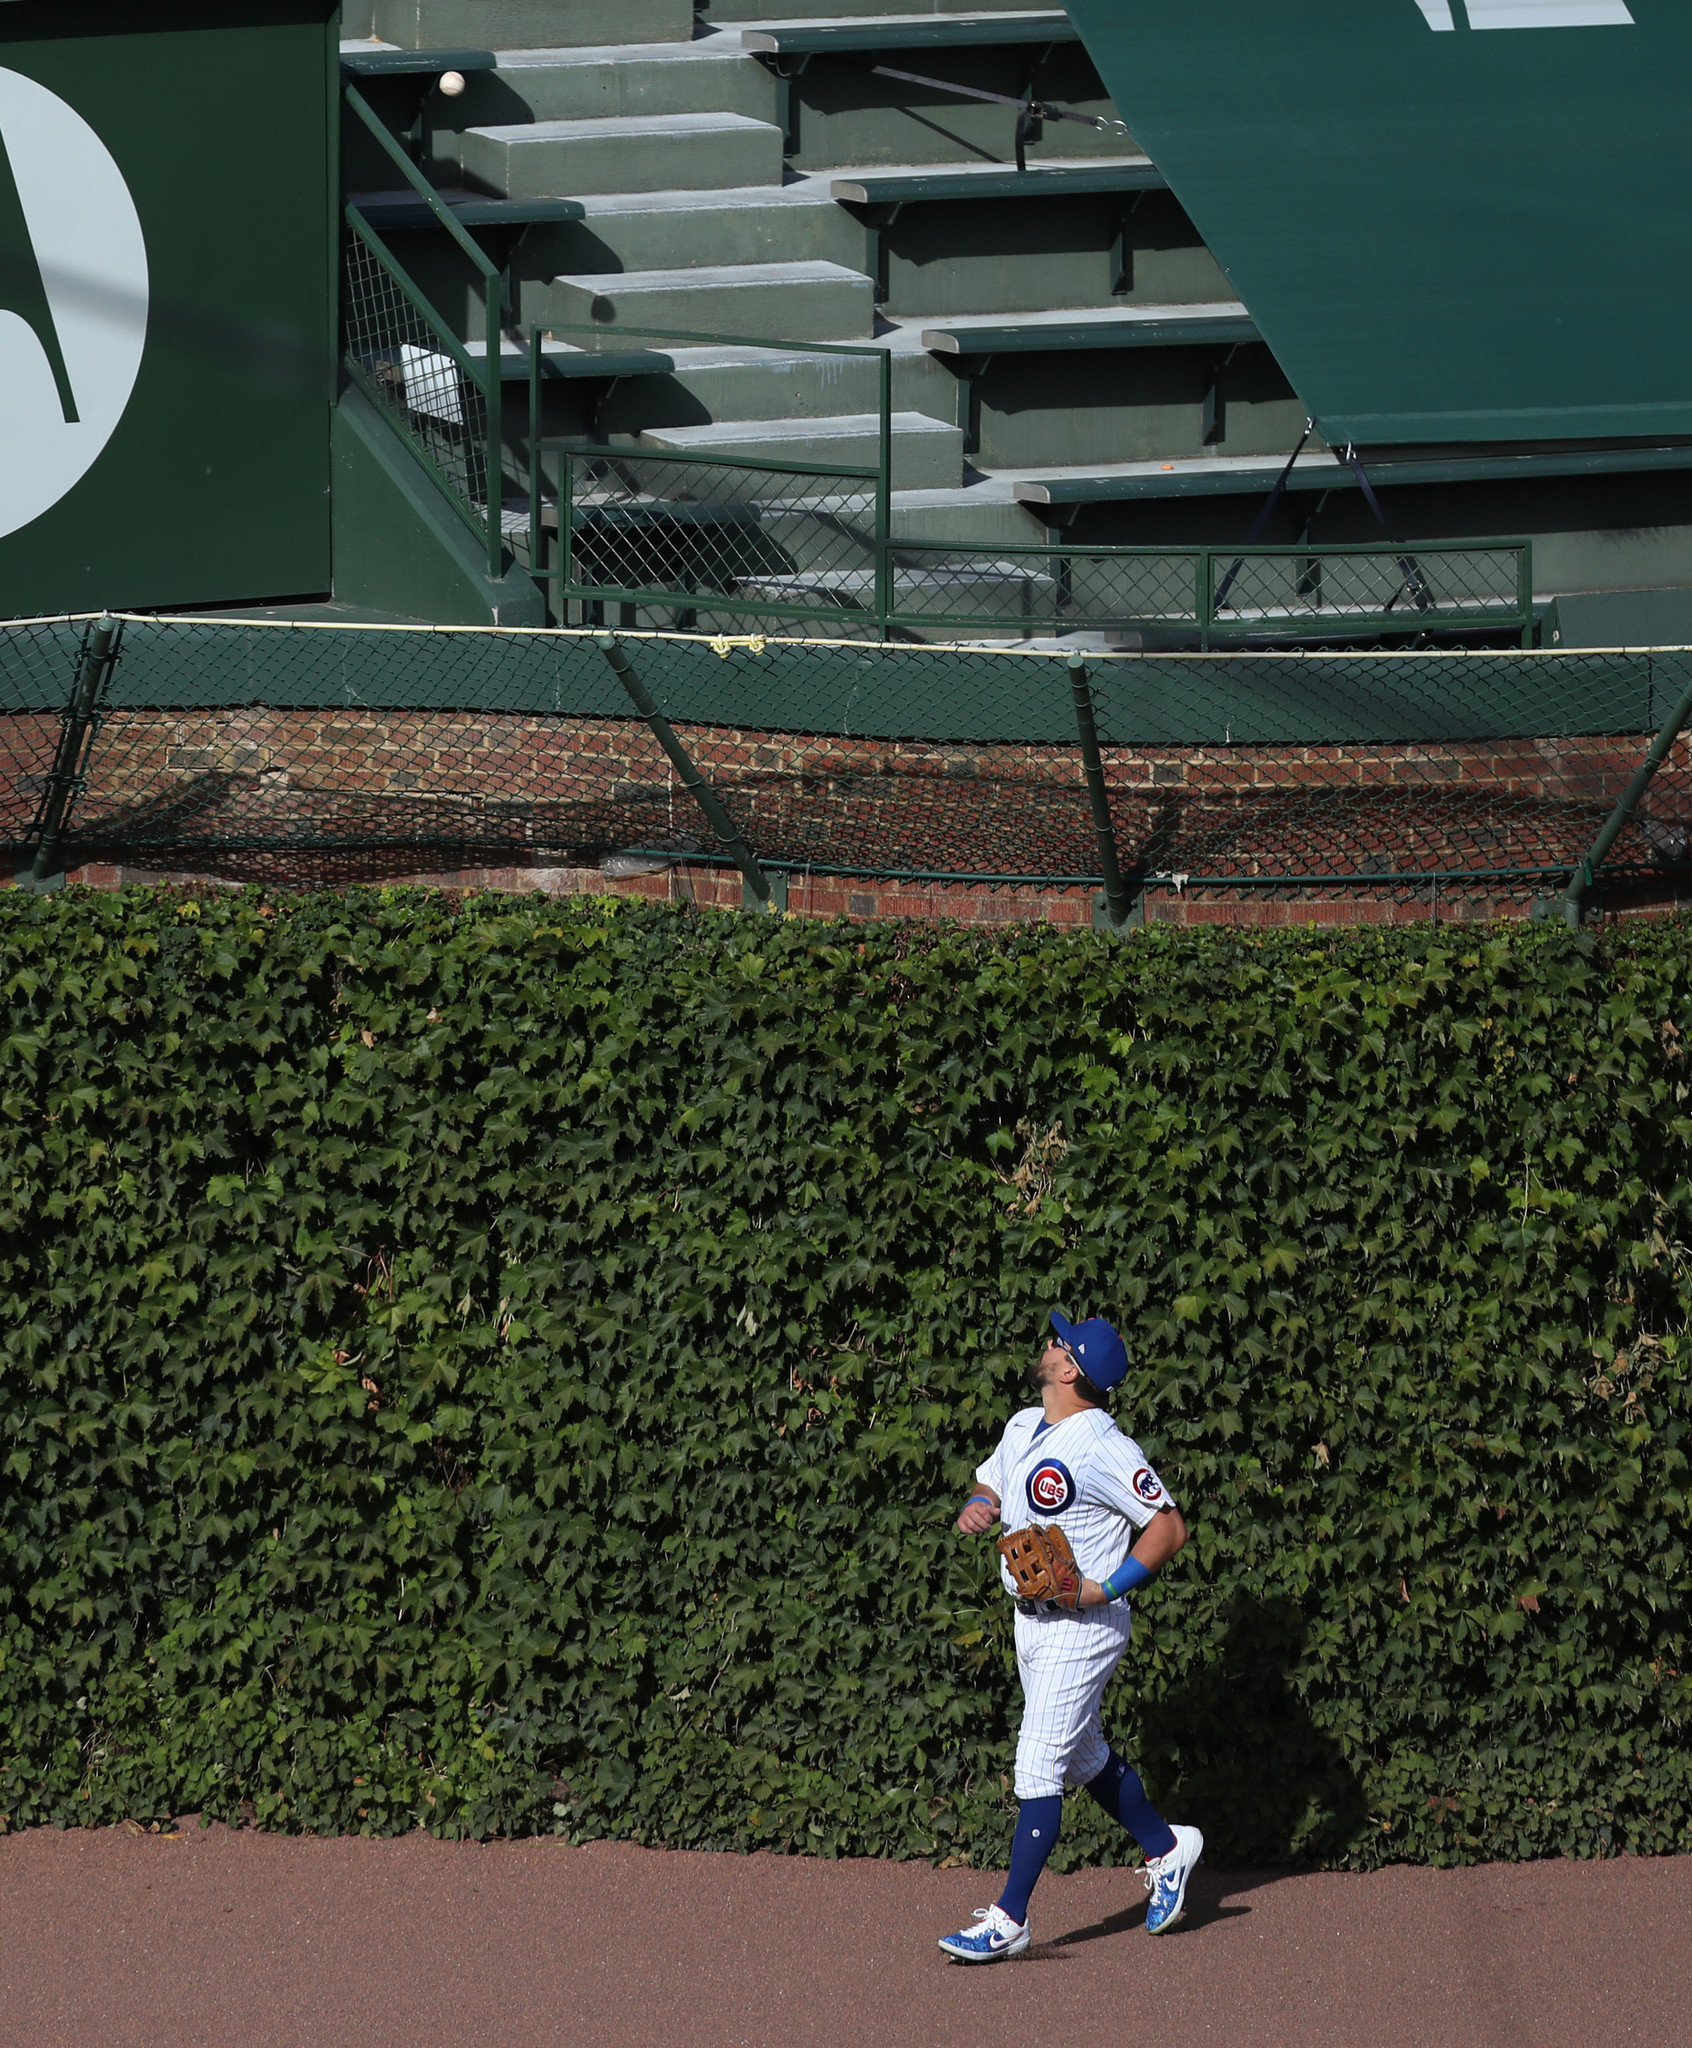 This time, let's all be more realistic about Kyle Schwarber